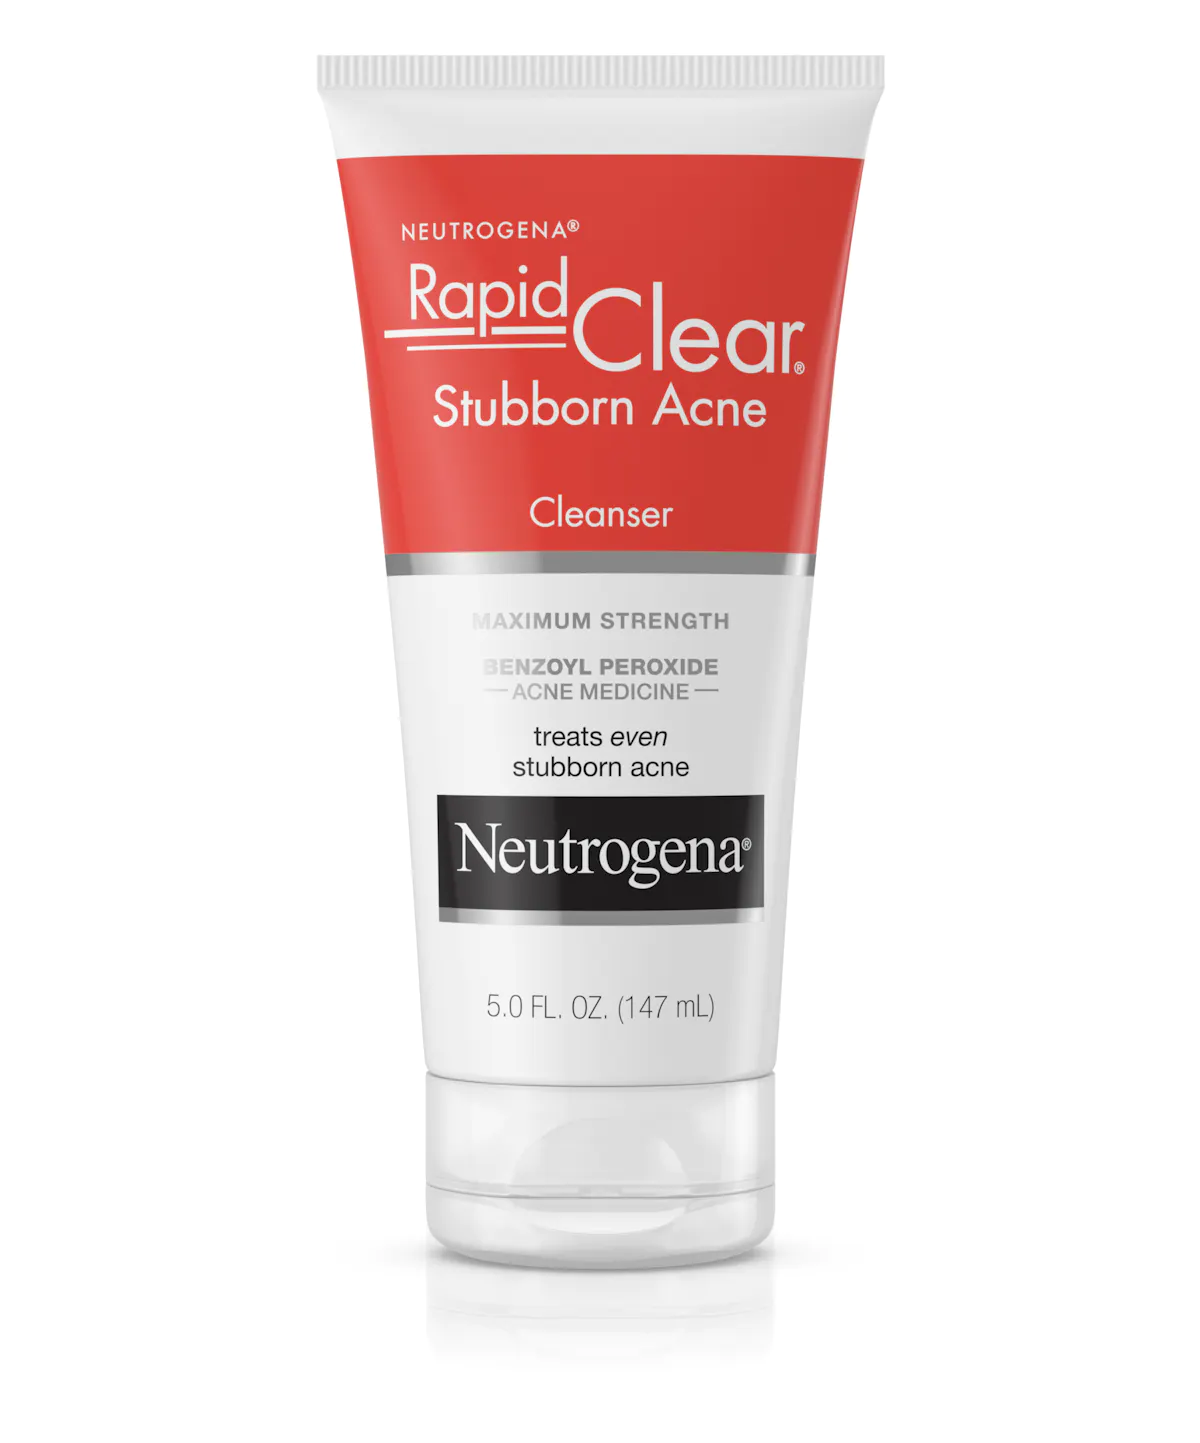 Neutrogena Rapid Clear Stubborn Acne Face Wash with 10% Benzoyl Peroxide Acne Treatment Medicine, Daily Facial Cleanser to Reduce Size and Redness of Acne, Benzoyl Peroxide Acne Face Wash, 5 Fl Oz Stubborn Acne Wash